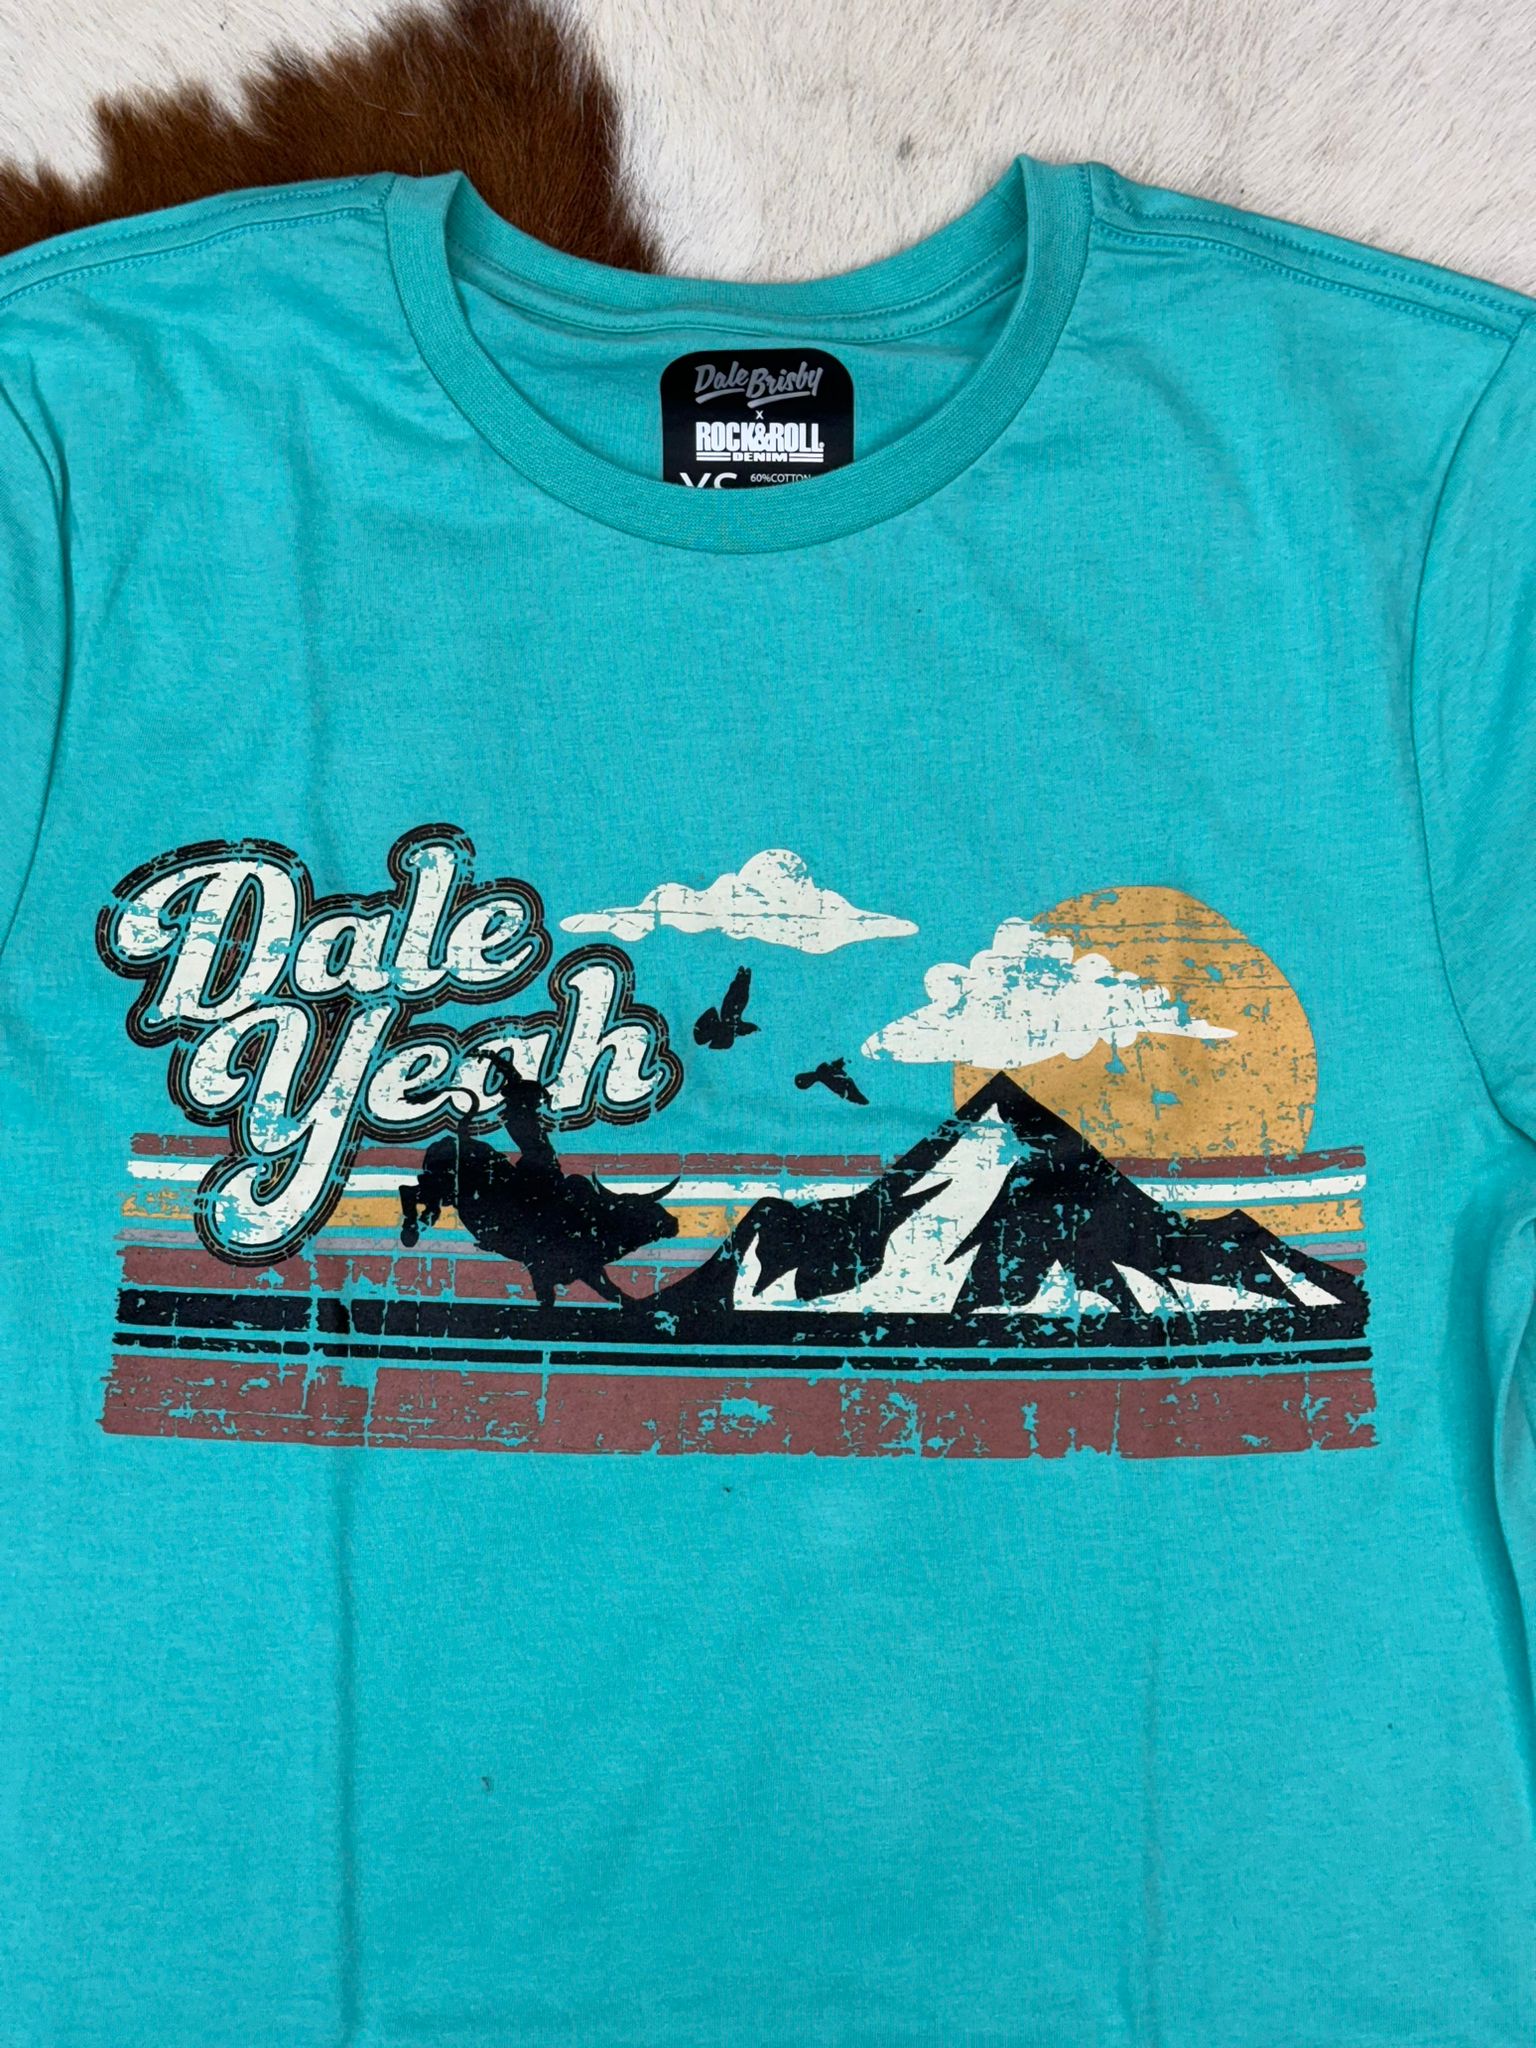 DALE BRISBY X ROCK&ROLL GRAPHIC TEE WESTERN MOUNTAIN TURQUOISE SHORT SLEEVE T-SHIRT